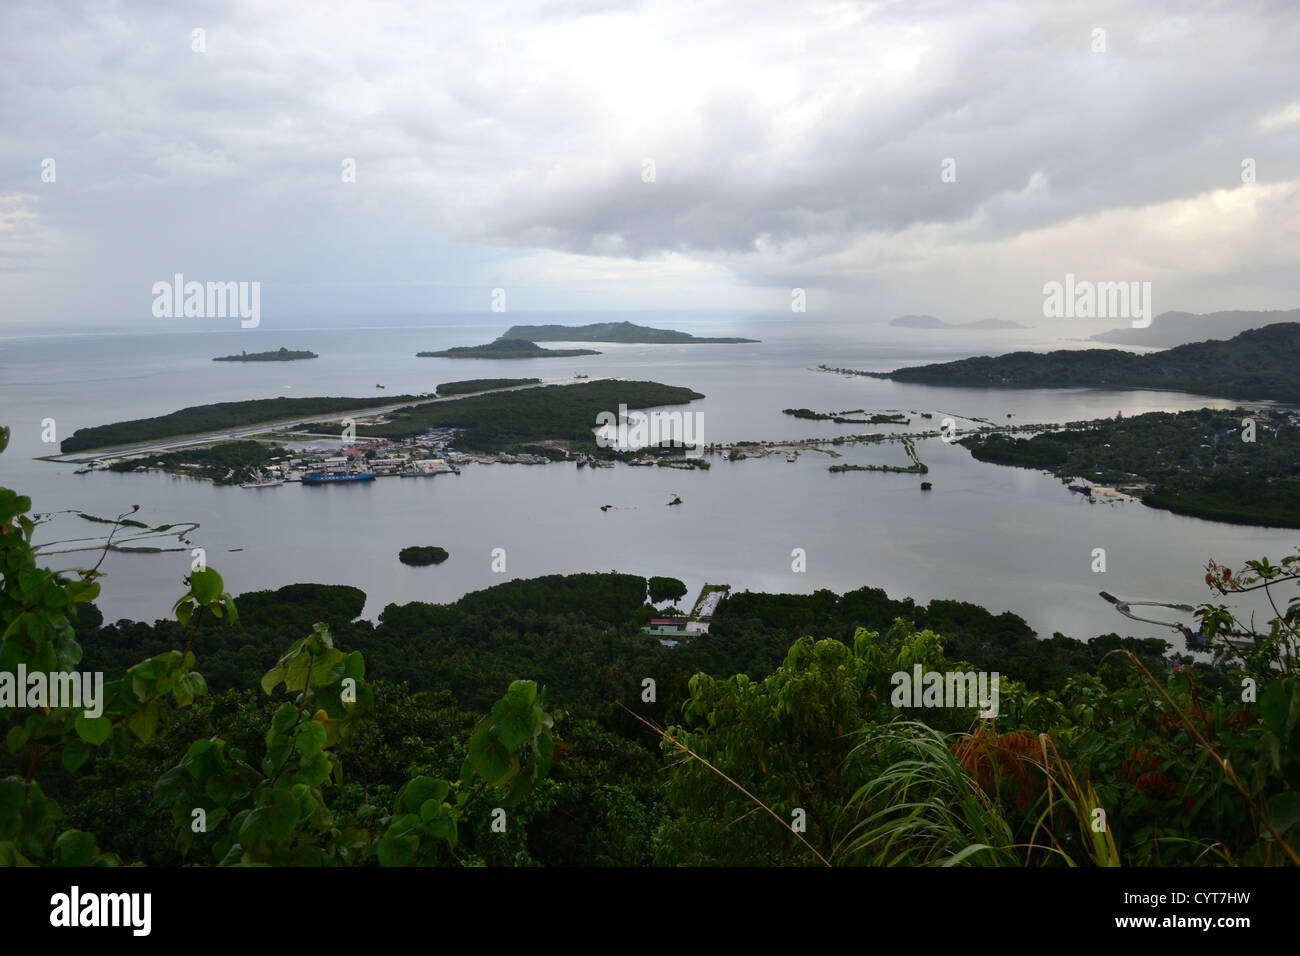 Aerial view of Kolonia and lagoon, Pohnpei, Federated States of Micronesia Stock Photo